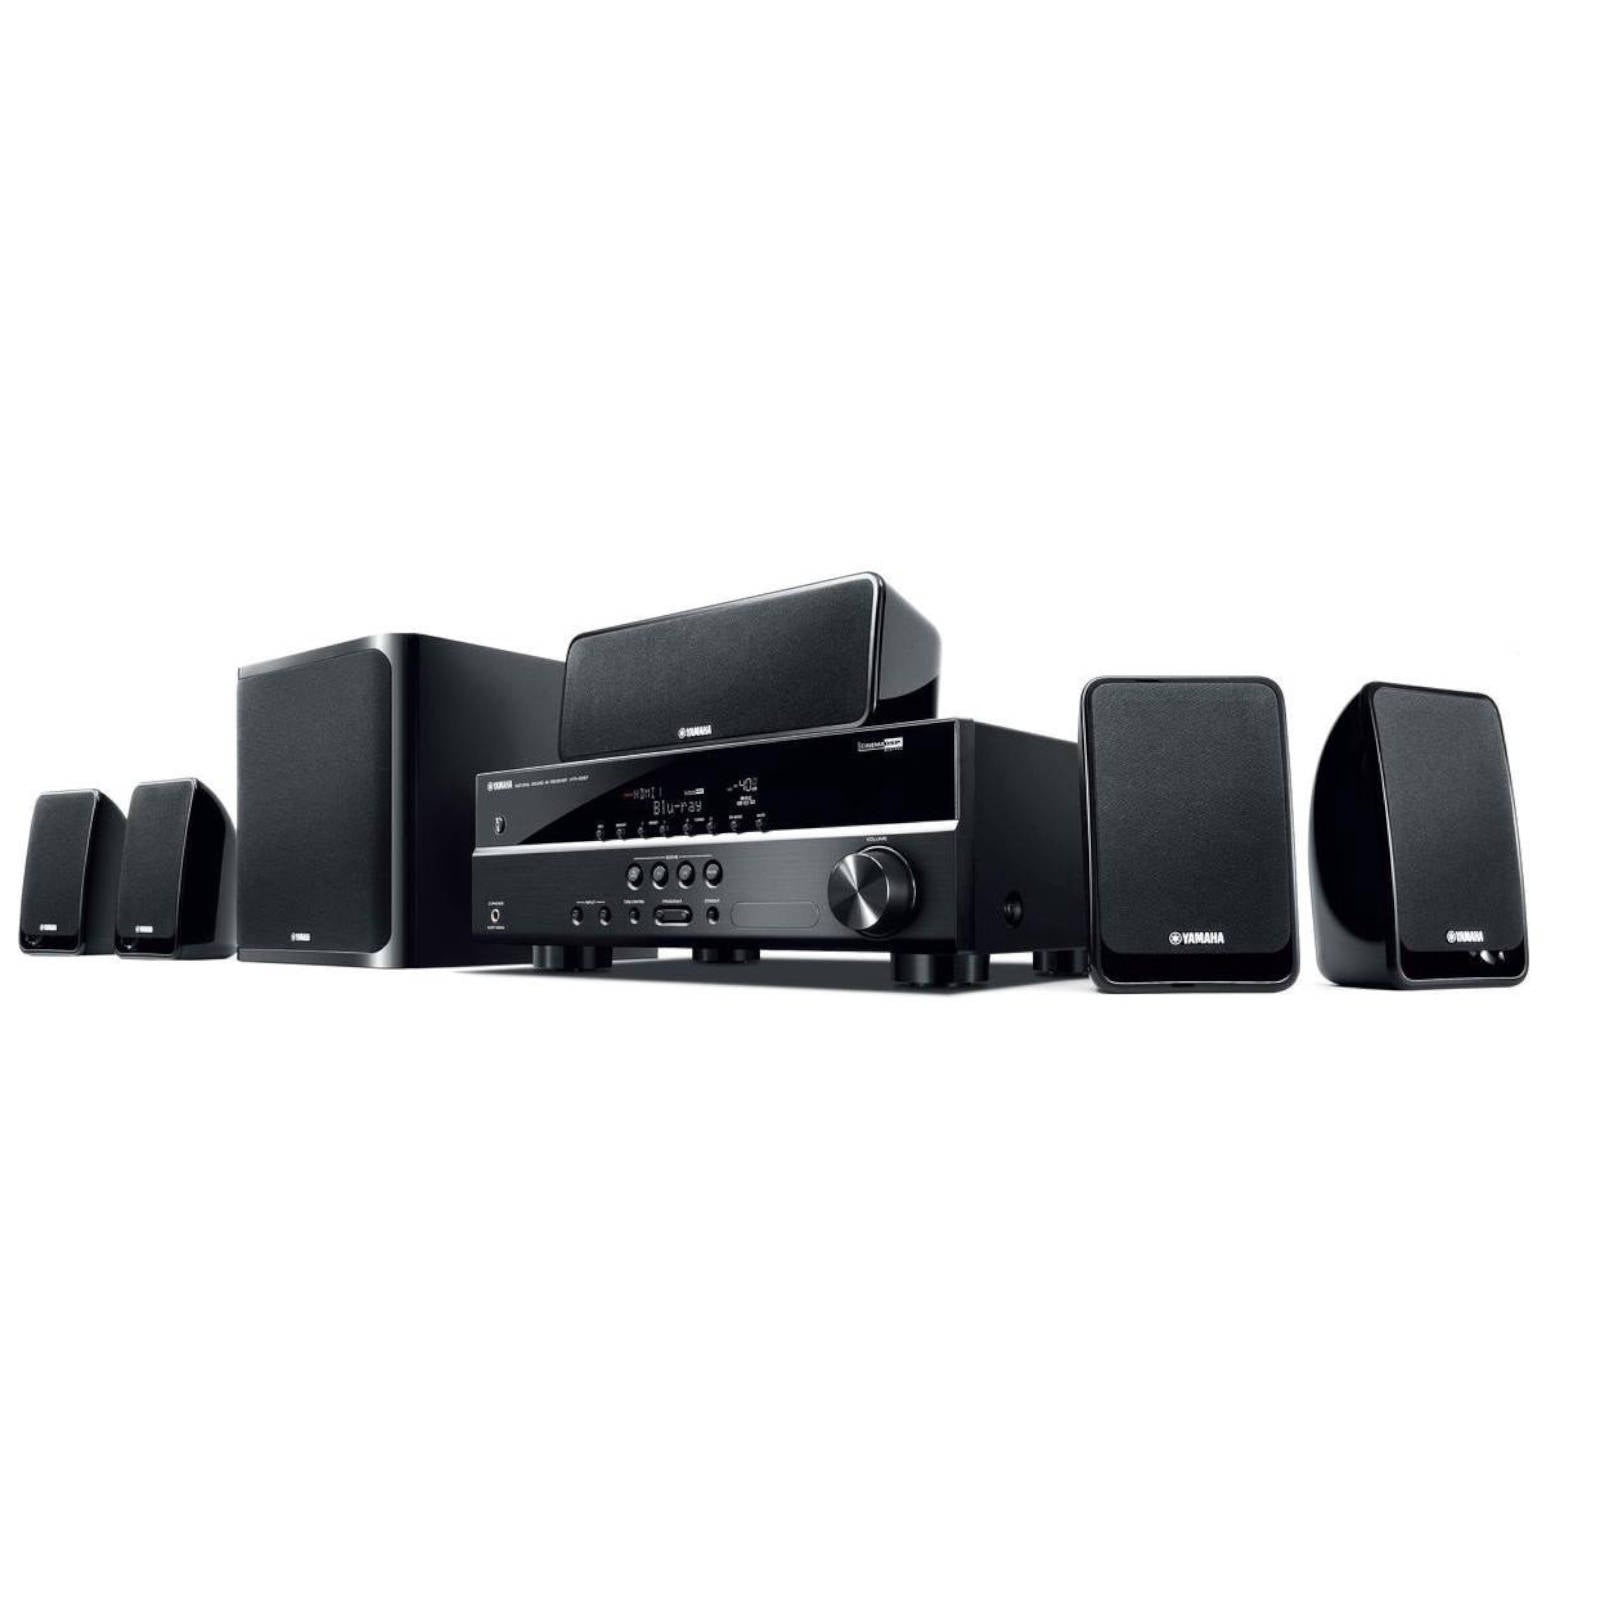 Yamaha YHT-1840 5.1 Ch Home Theater System - Ooberpad